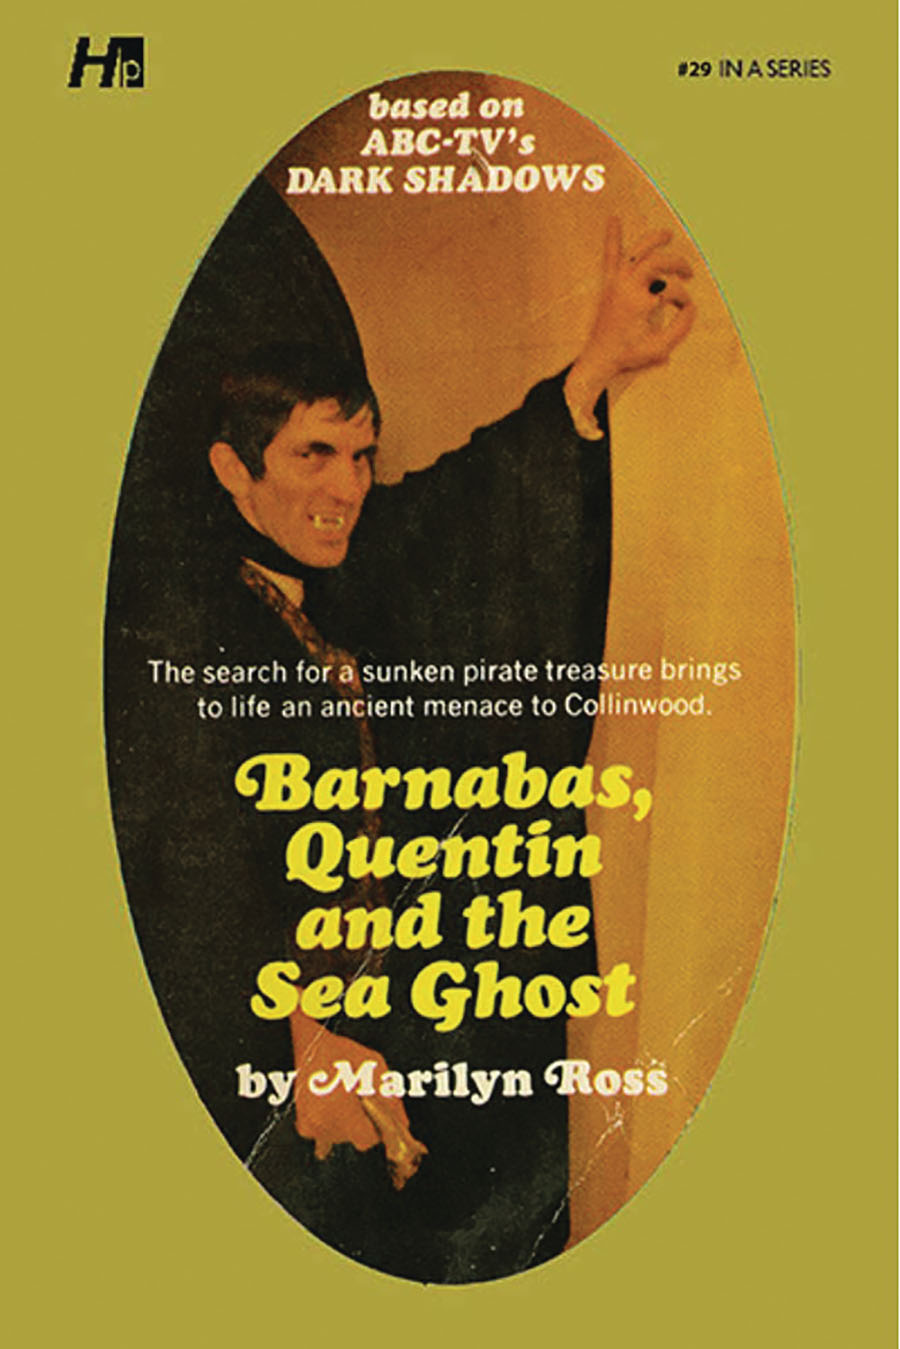 Dark Shadows Paperback Library Novel Vol 29 Barnabas Quentin And The Sea Ghost TP